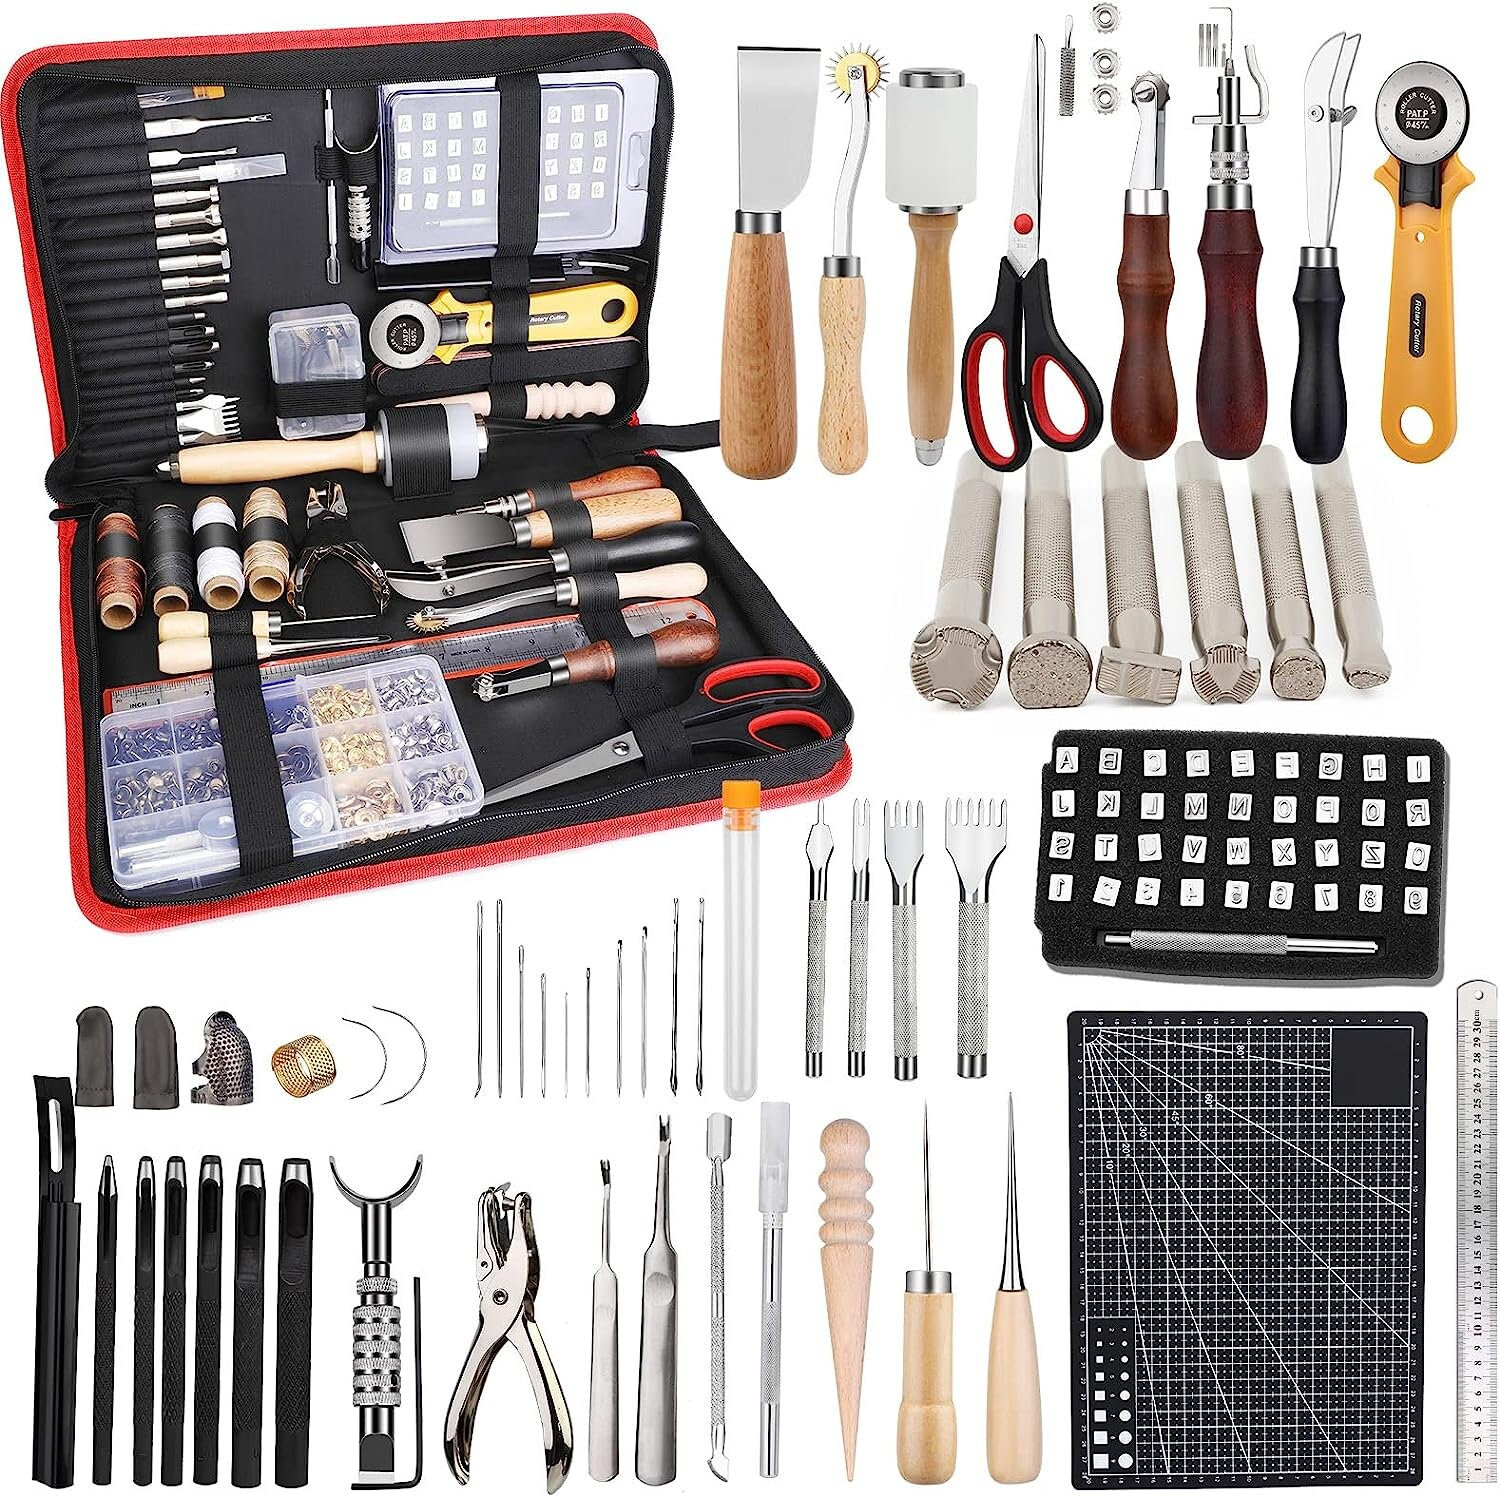 Leather Sewing Tools 44 pcs Leather Craft Tools Kit for Hand Sewing St